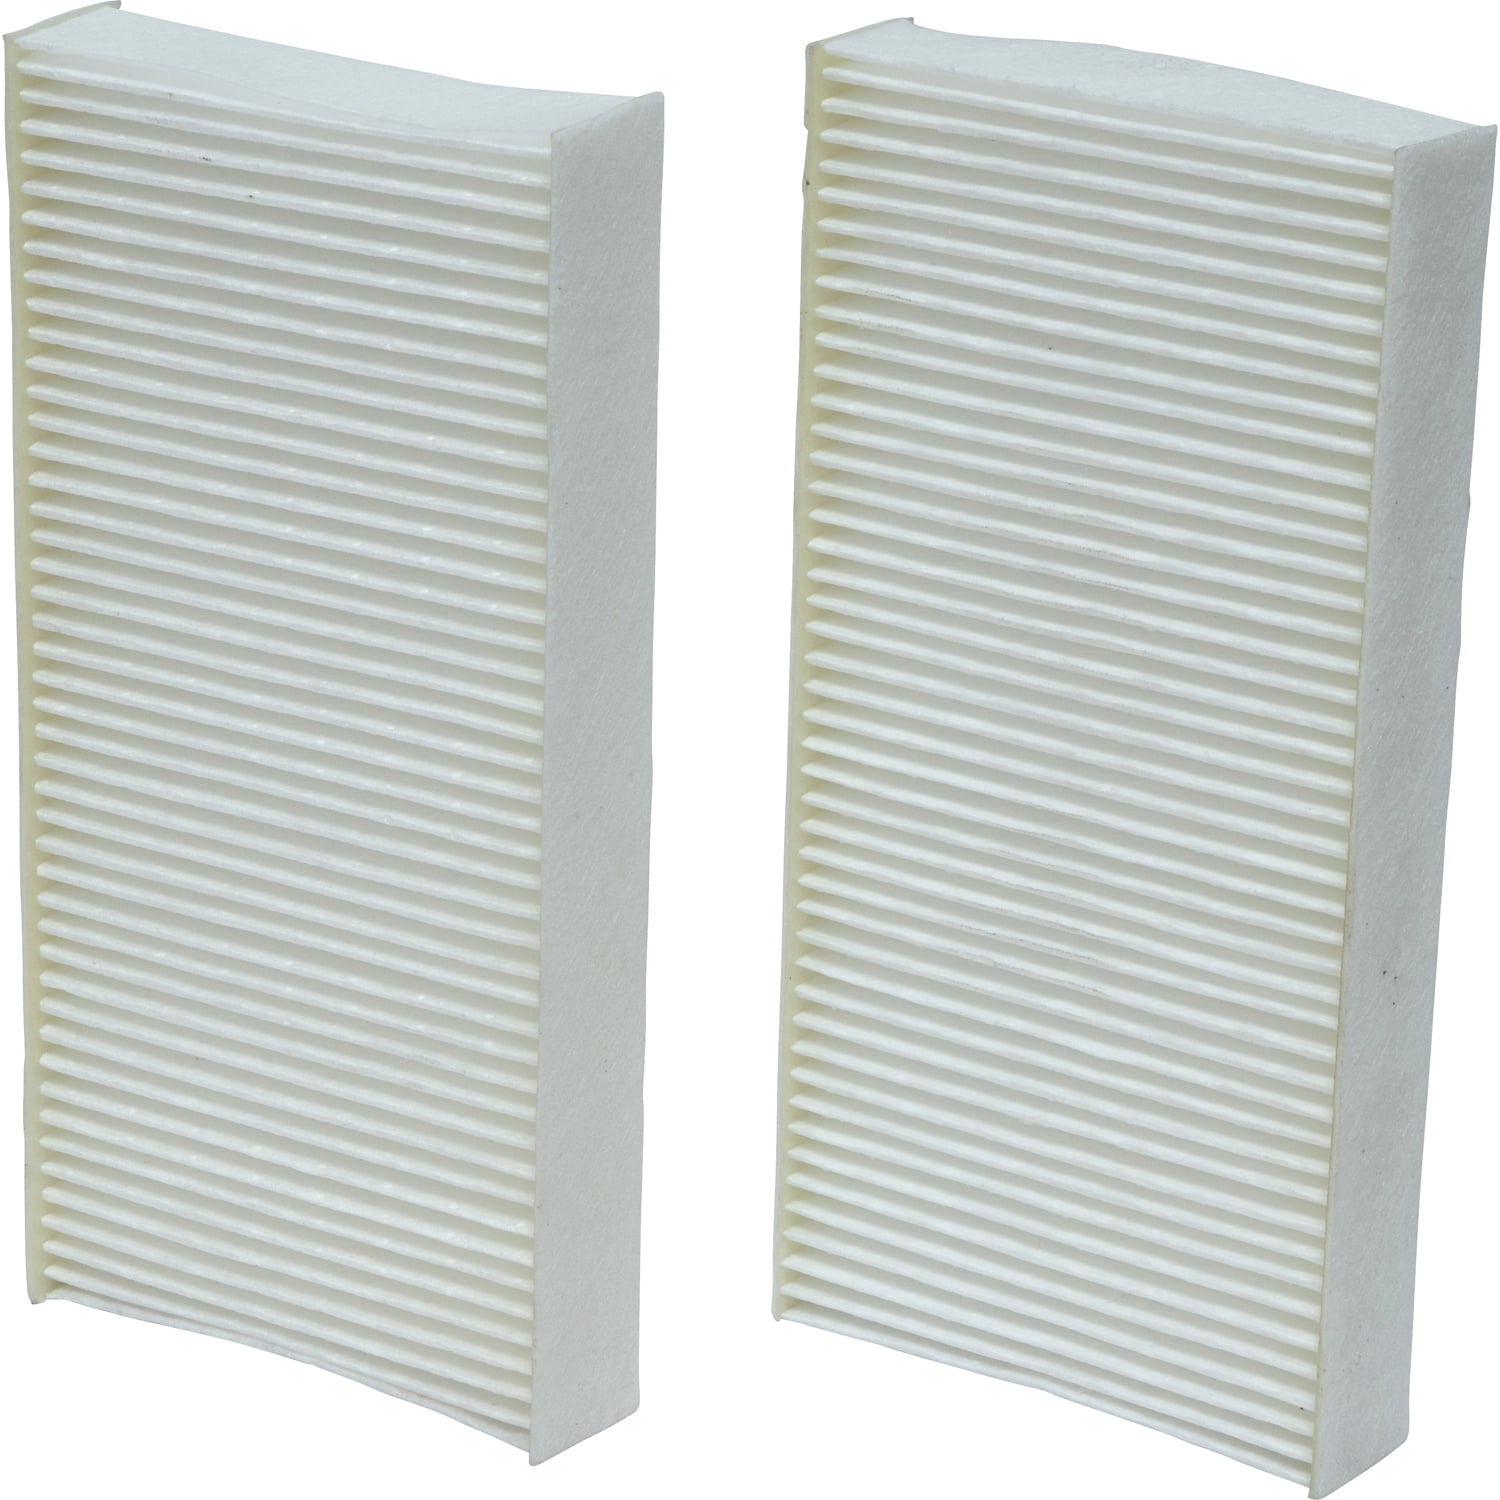 New Cabin Air Filter for Civic CR-V Element RSX